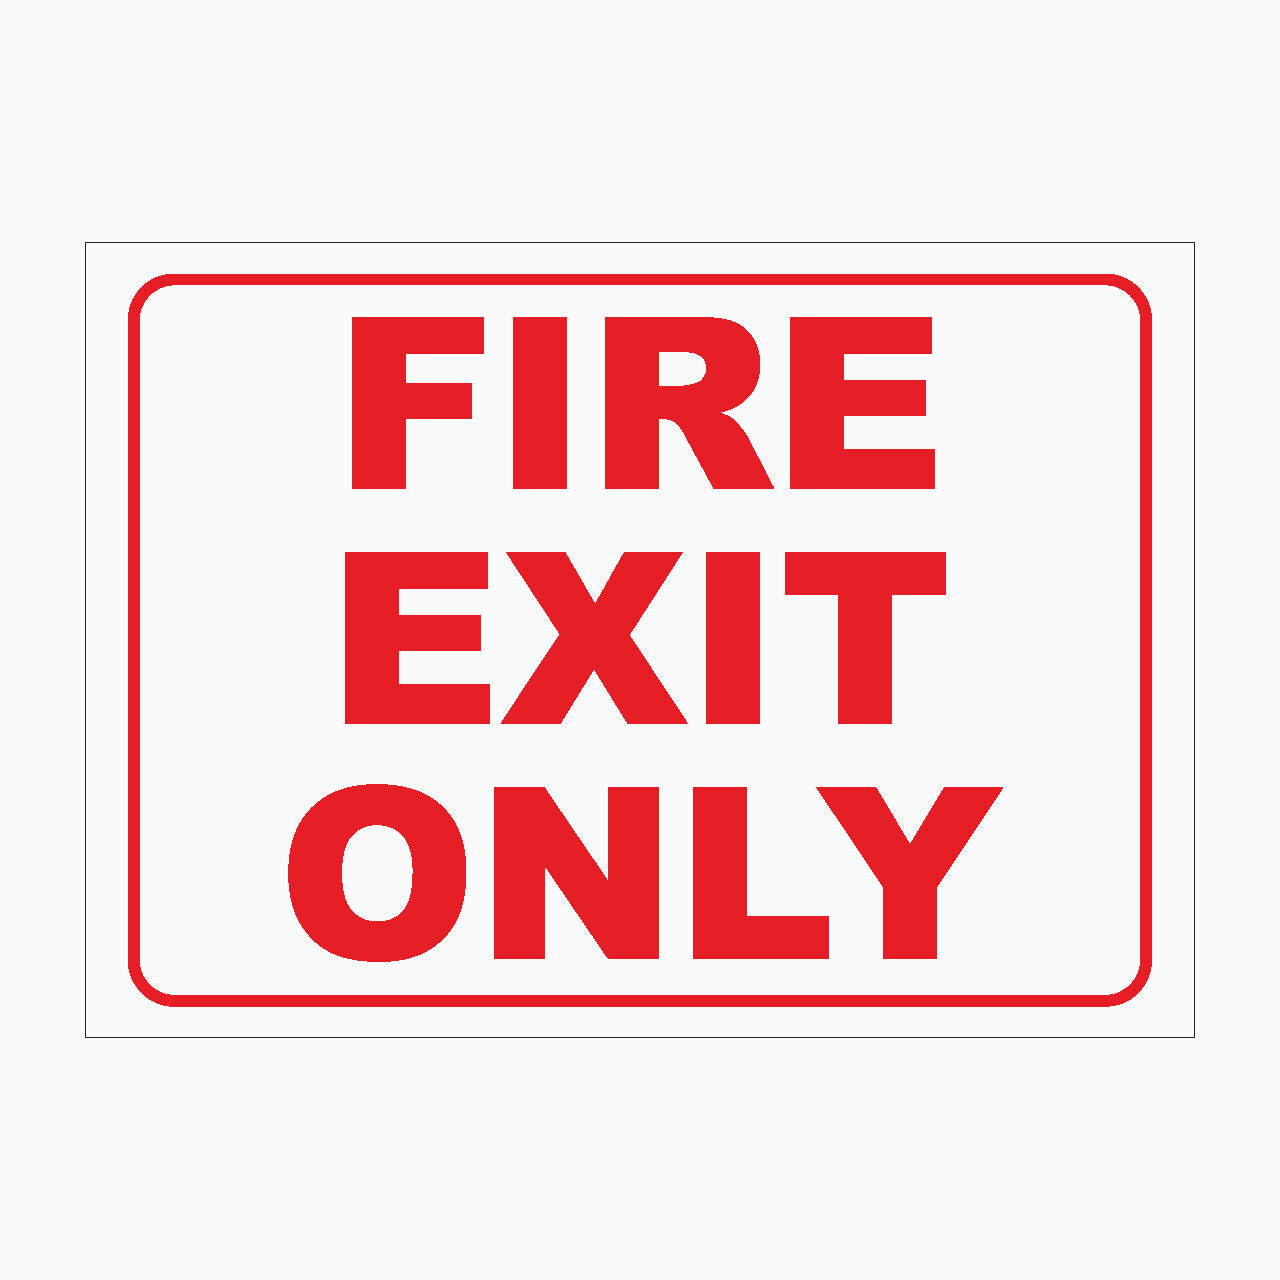 FIRE EXIT ONLY SIGN - FIRE SAFETY SIGNS - FIRE SAFETY SIGNS  - SHOP ONLINE - GET SIGNS